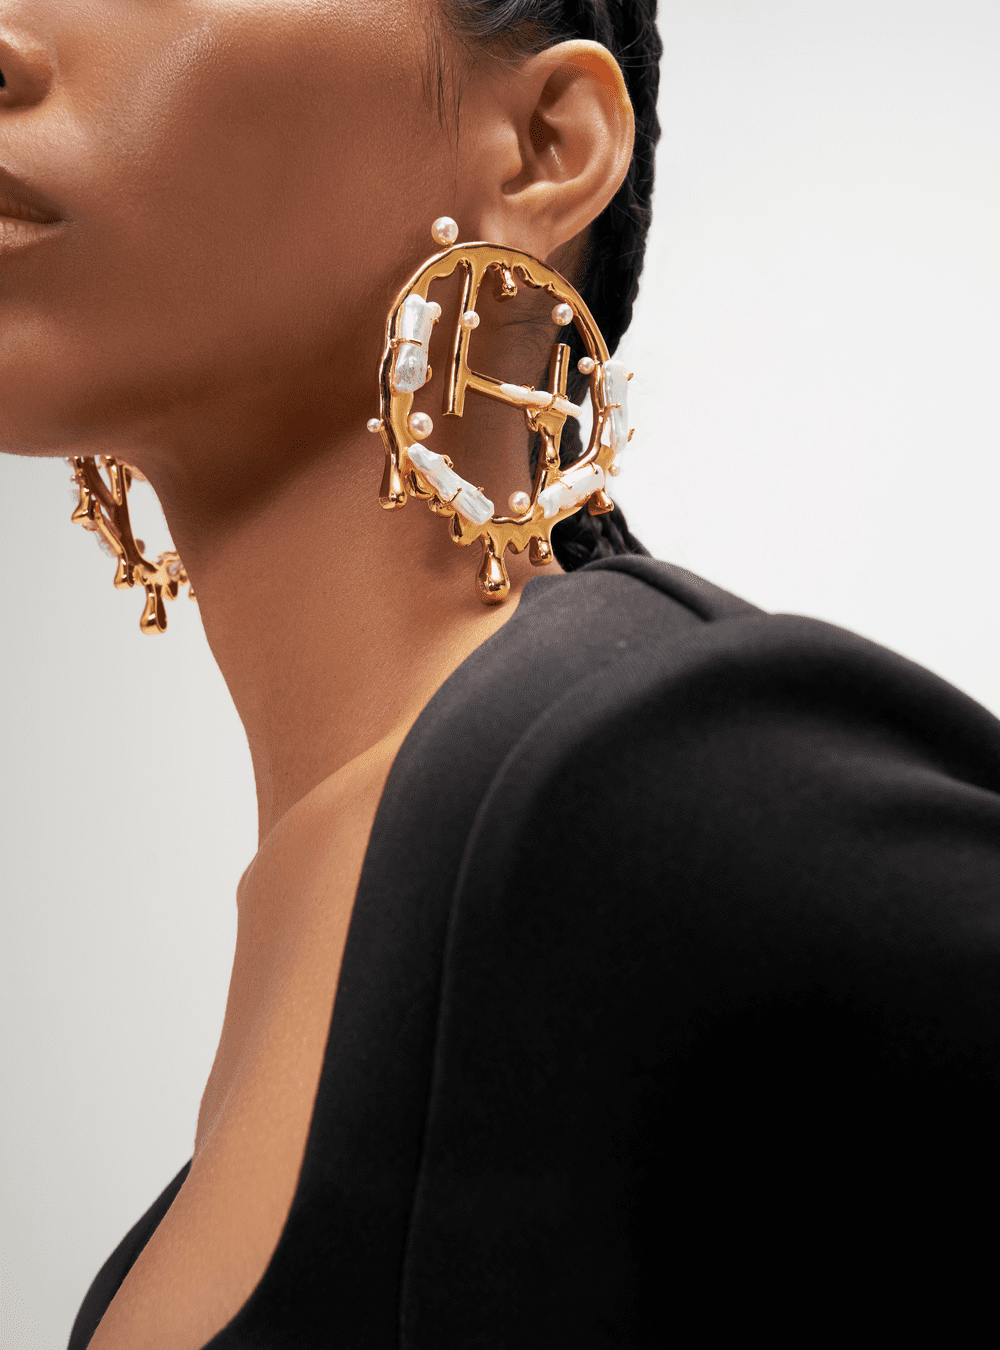 The Best Earring Styles For Your Face Shape – Sweetandspark